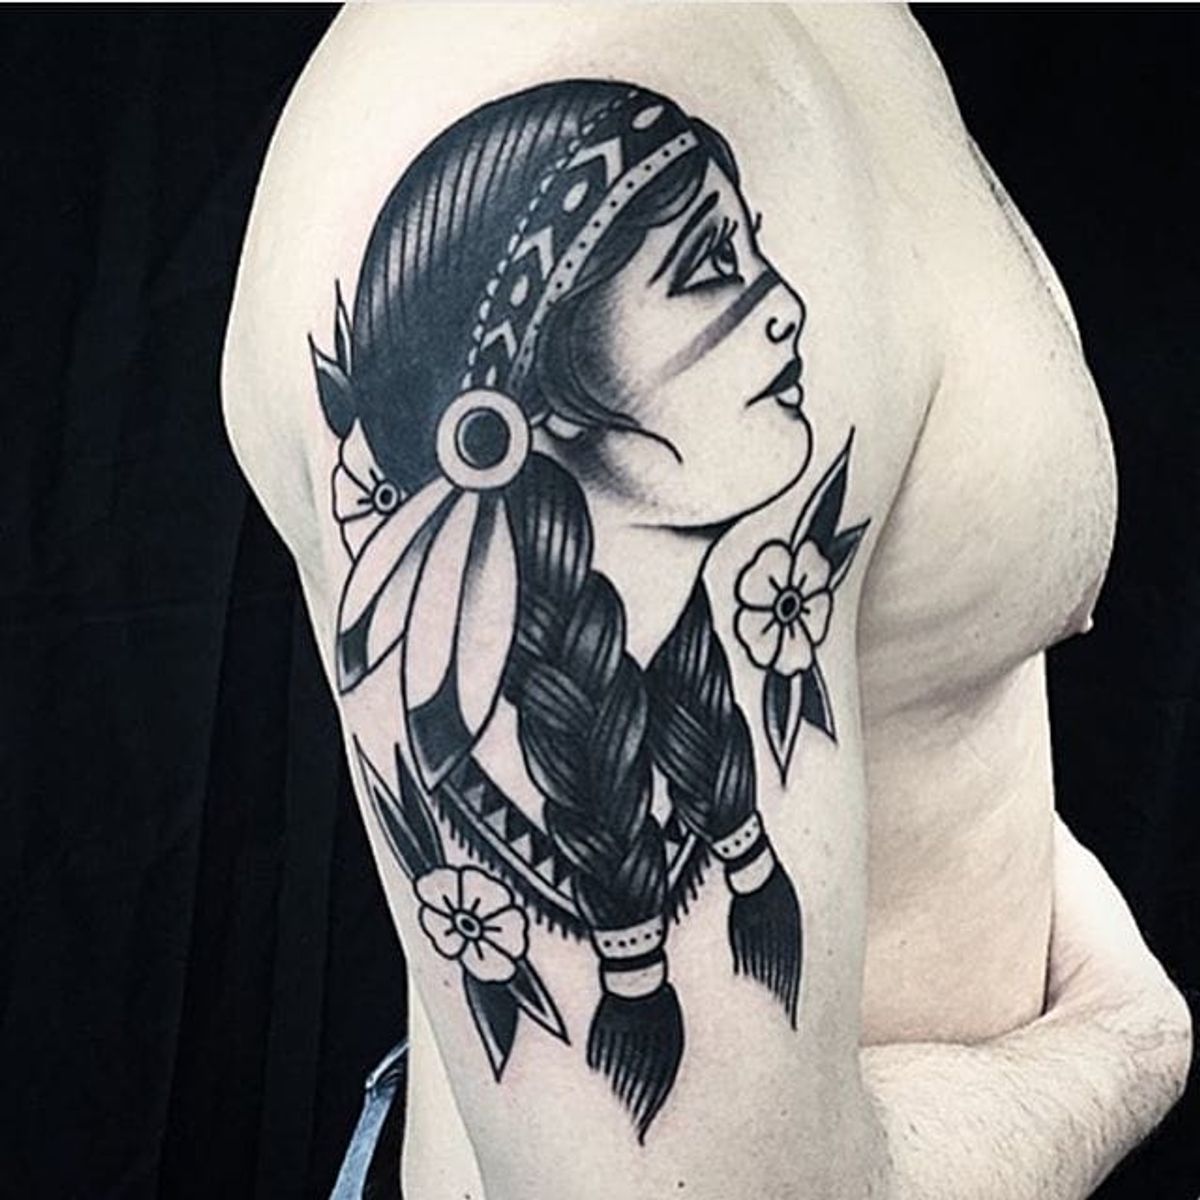 traditional native american tattoo designs